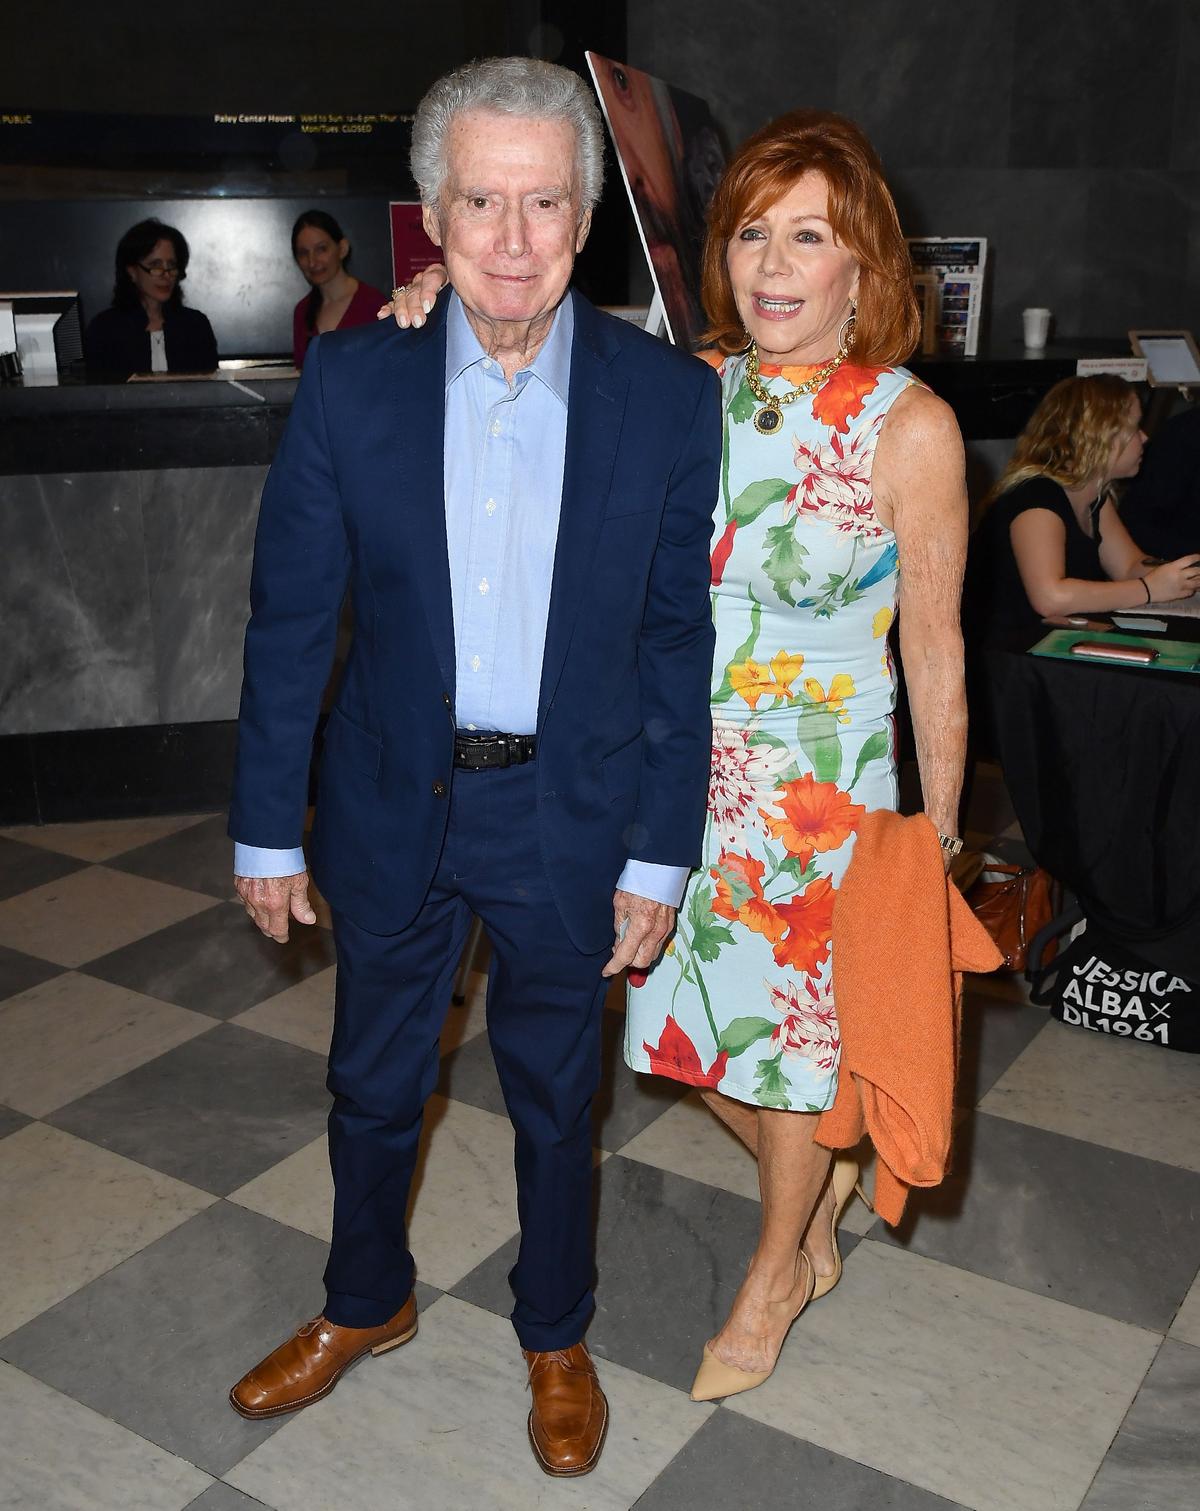 Regis Philbin and his wife, U.S. TV personality Joy Philbin, arrive for the New York screening of "The Wife" at Paley Center on July 26, 2018, in New York City. (©Getty Images | <a href="https://www.gettyimages.com/detail/news-photo/actor-and-media-personality-regis-philbin-and-his-wife-us-news-photo/1005794538">ANGELA WEISS/AFP</a>)